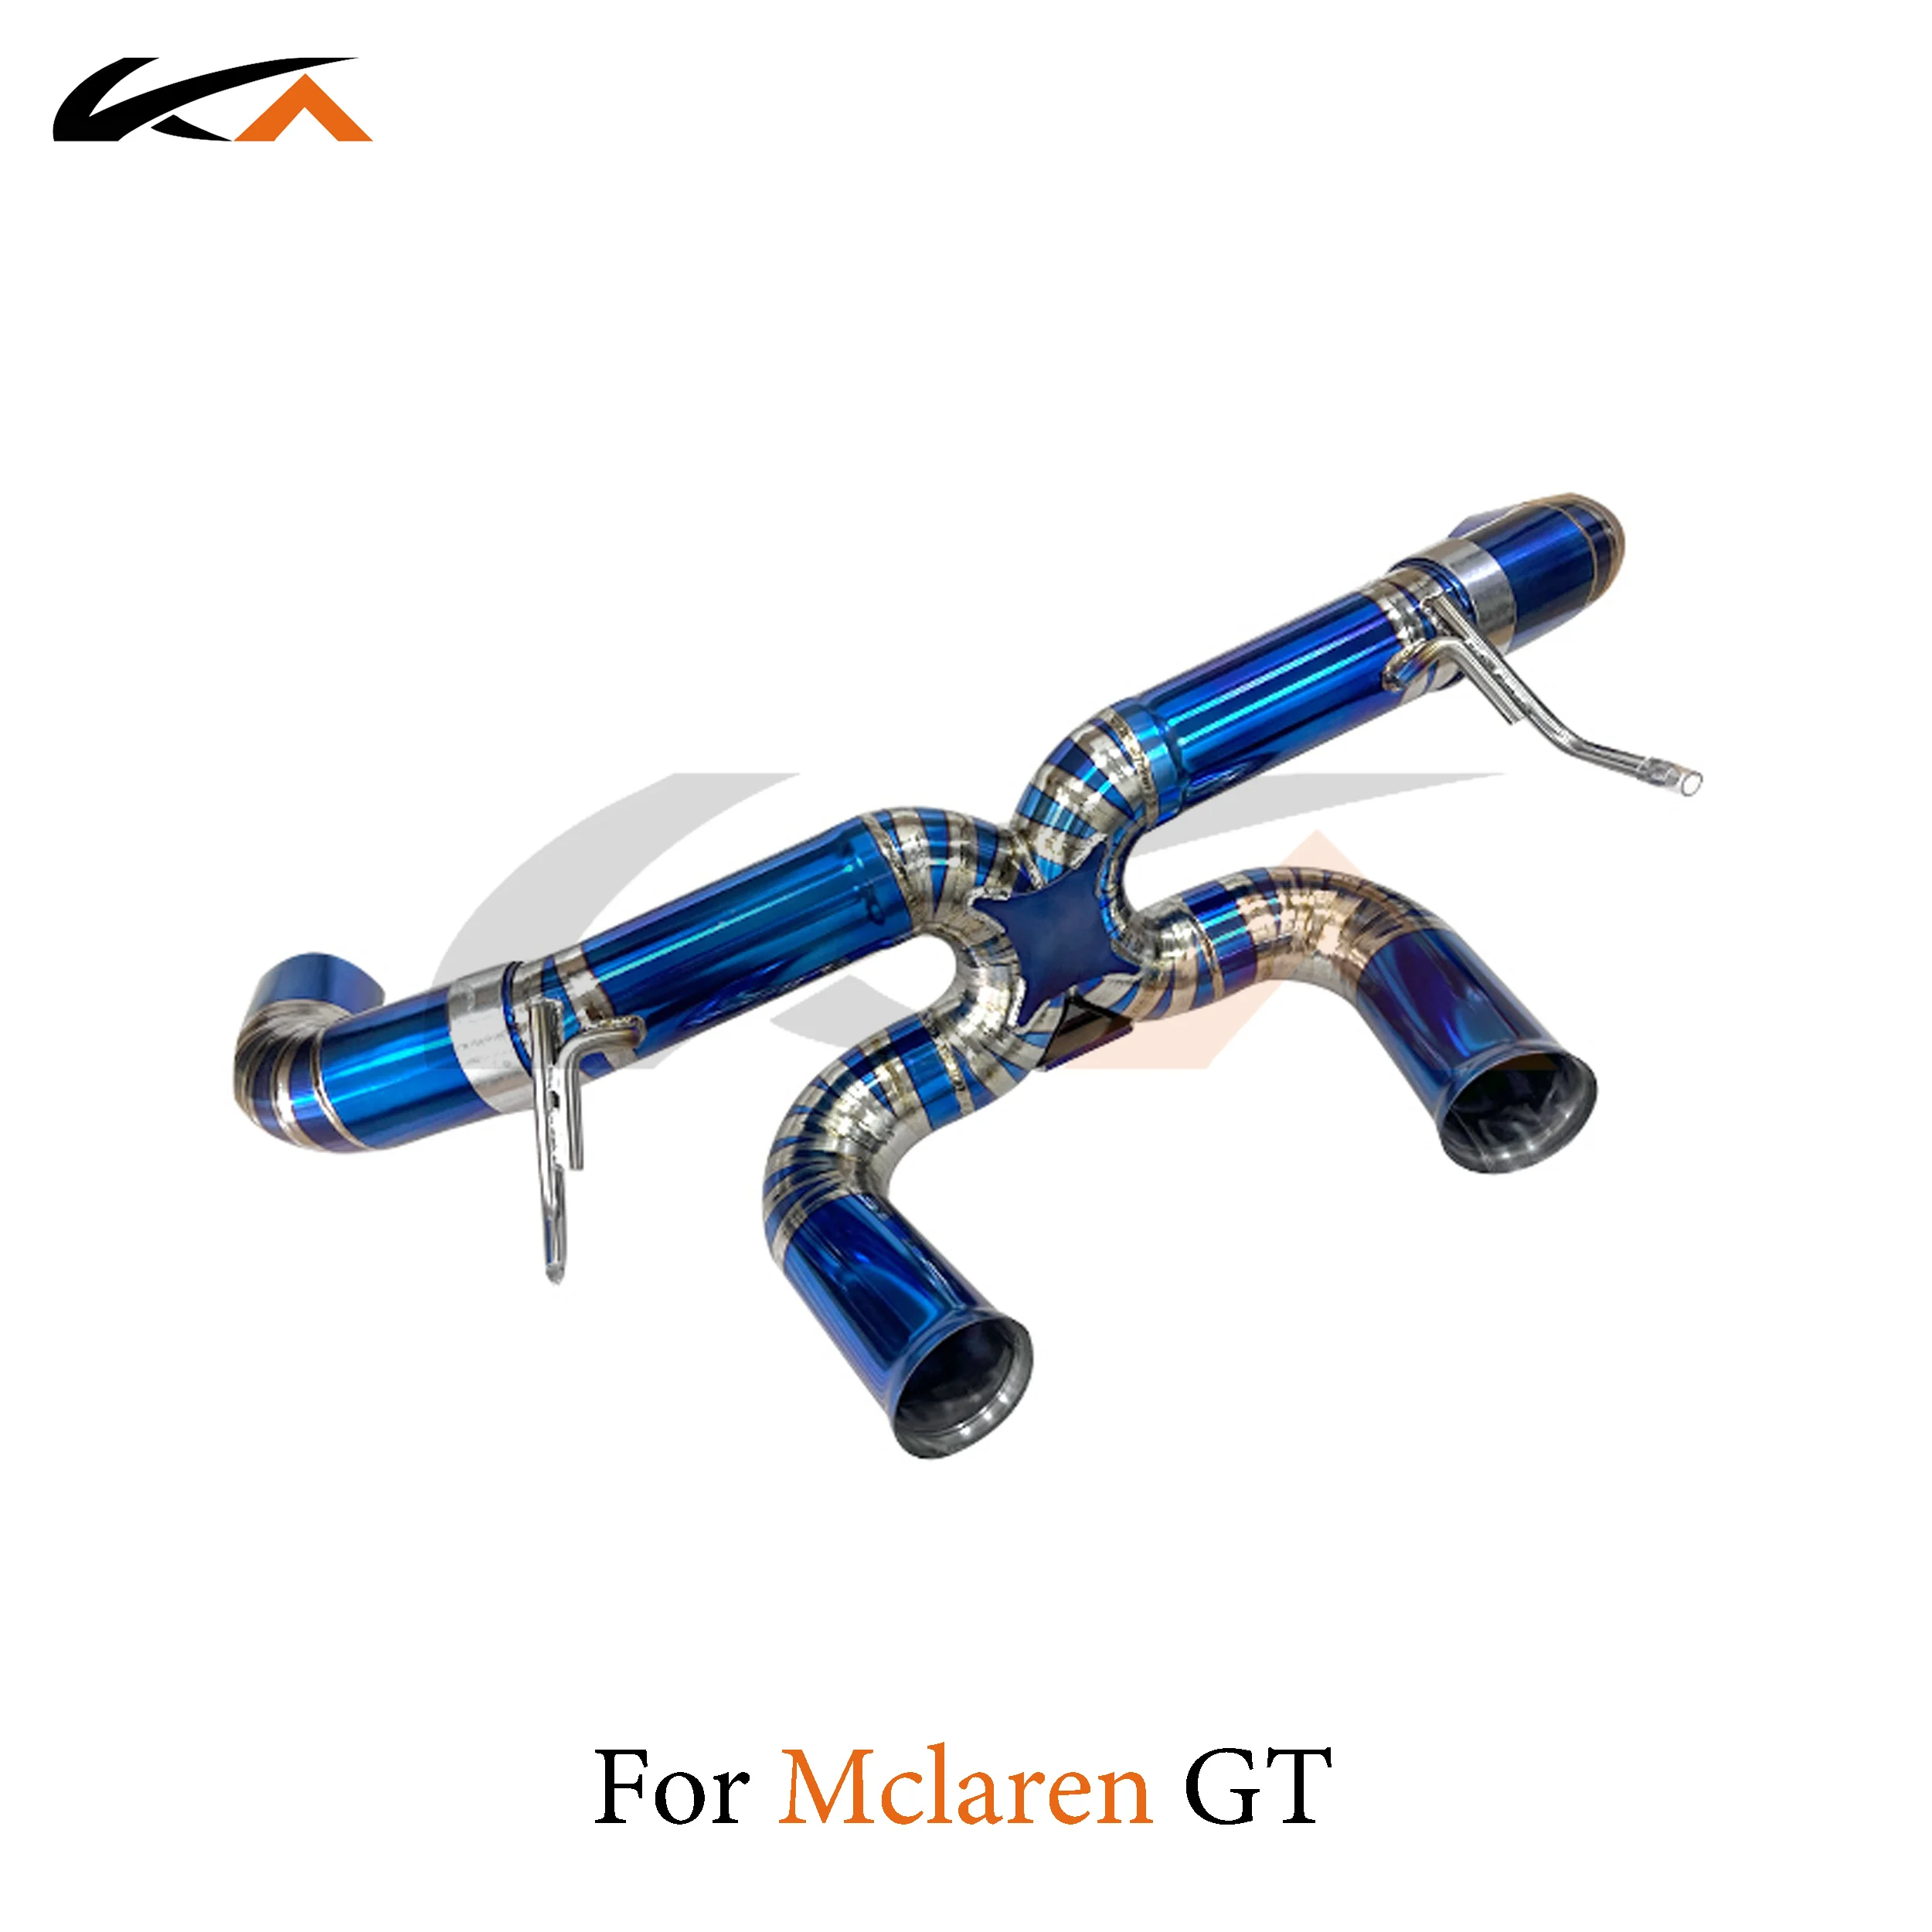 

KA Tuning exhaust system titanium alloy catback for Mclaren GT performance auto parts straight pipe car accessories